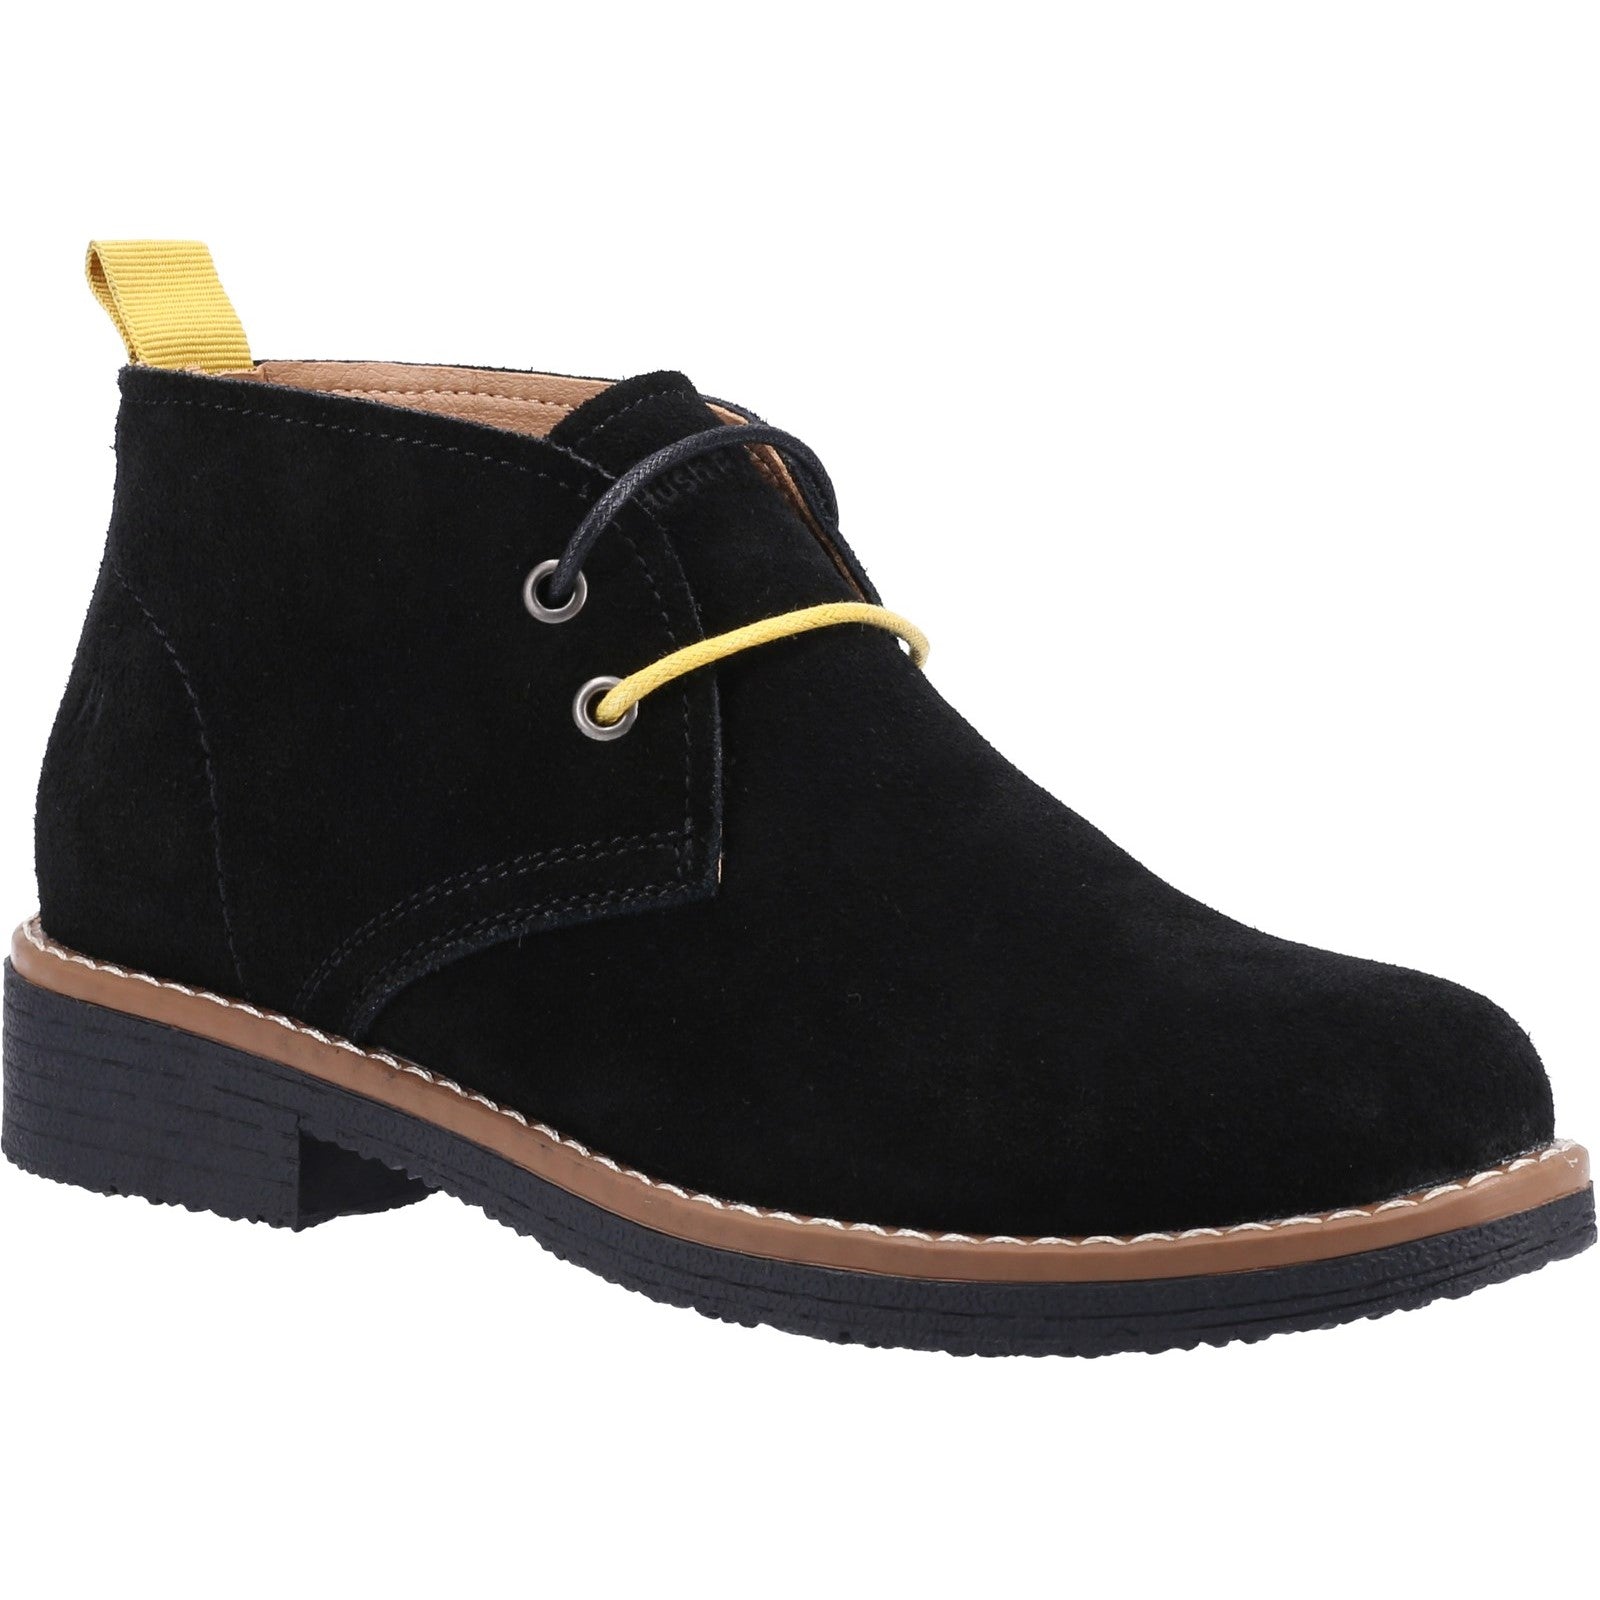 Hush Puppies Marie Ankle Boots